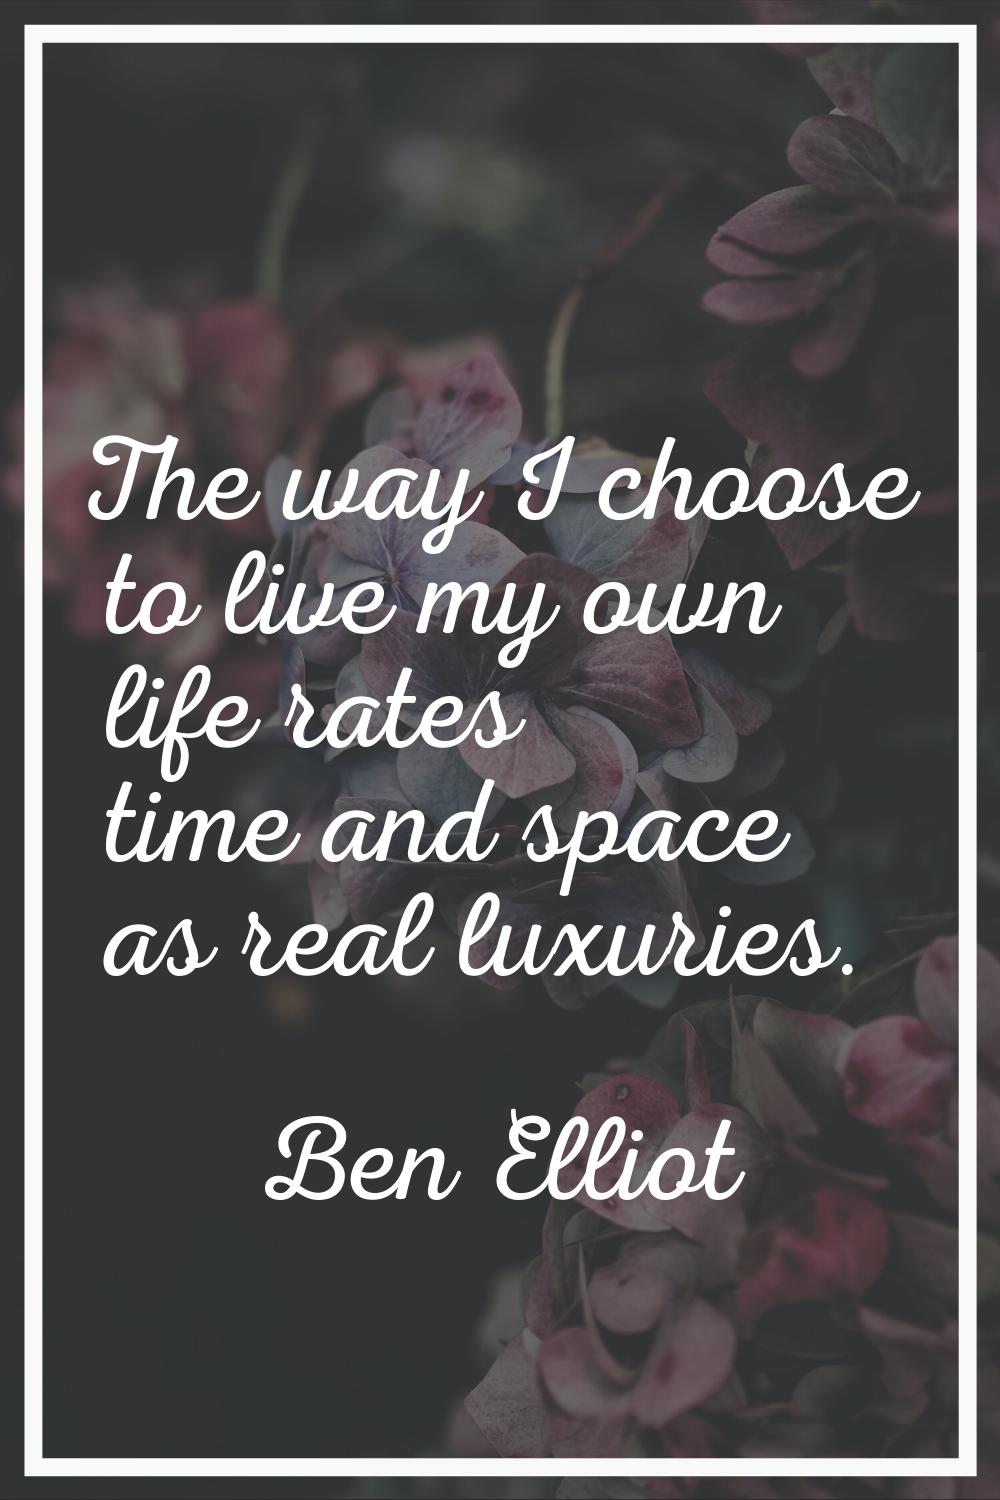 The way I choose to live my own life rates time and space as real luxuries.